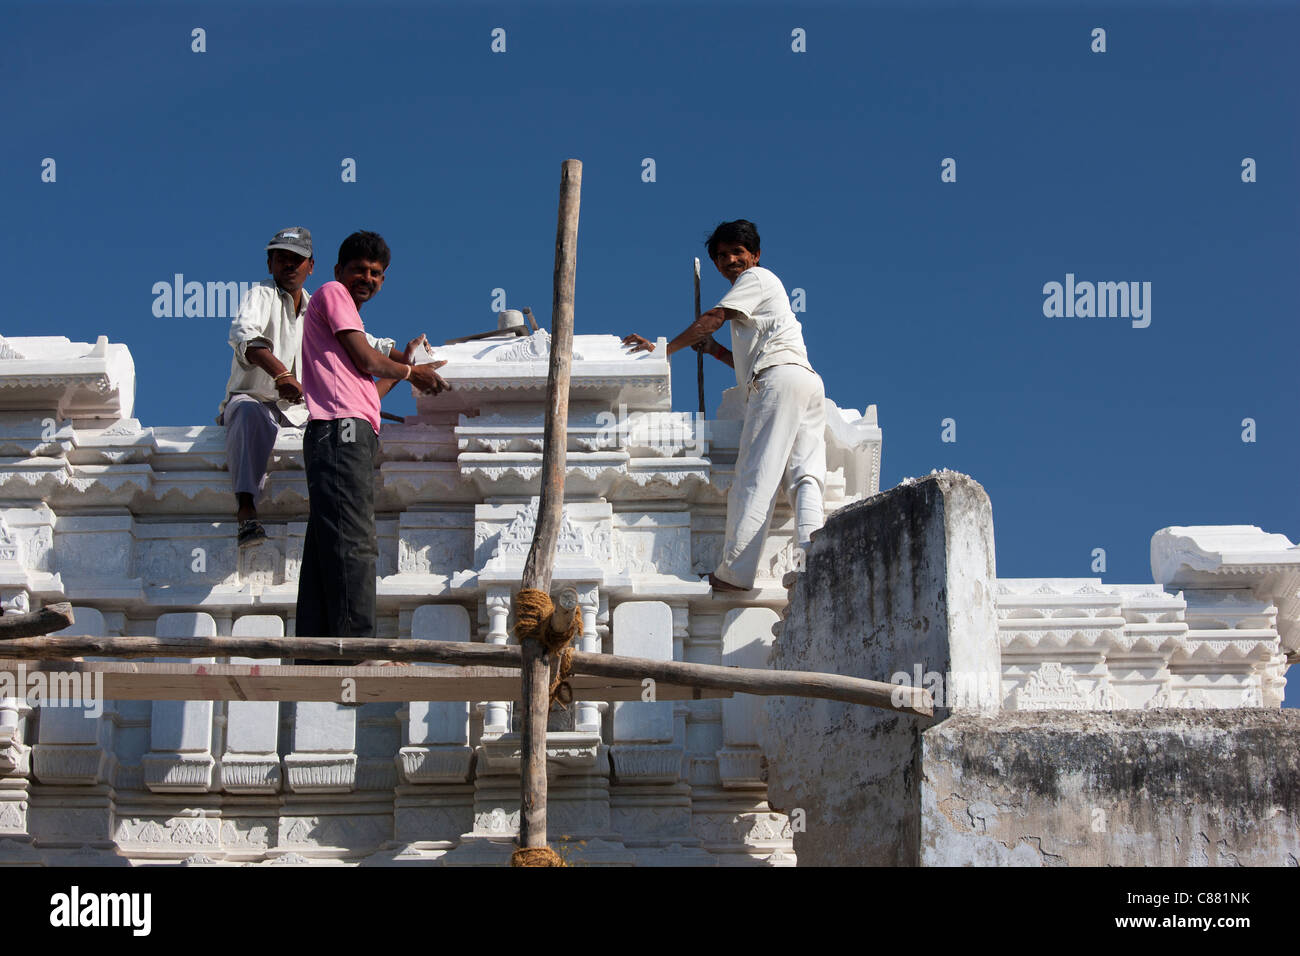 Indian builders working on a new building in Narlai village in Rajasthan, Northern India Stock Photo